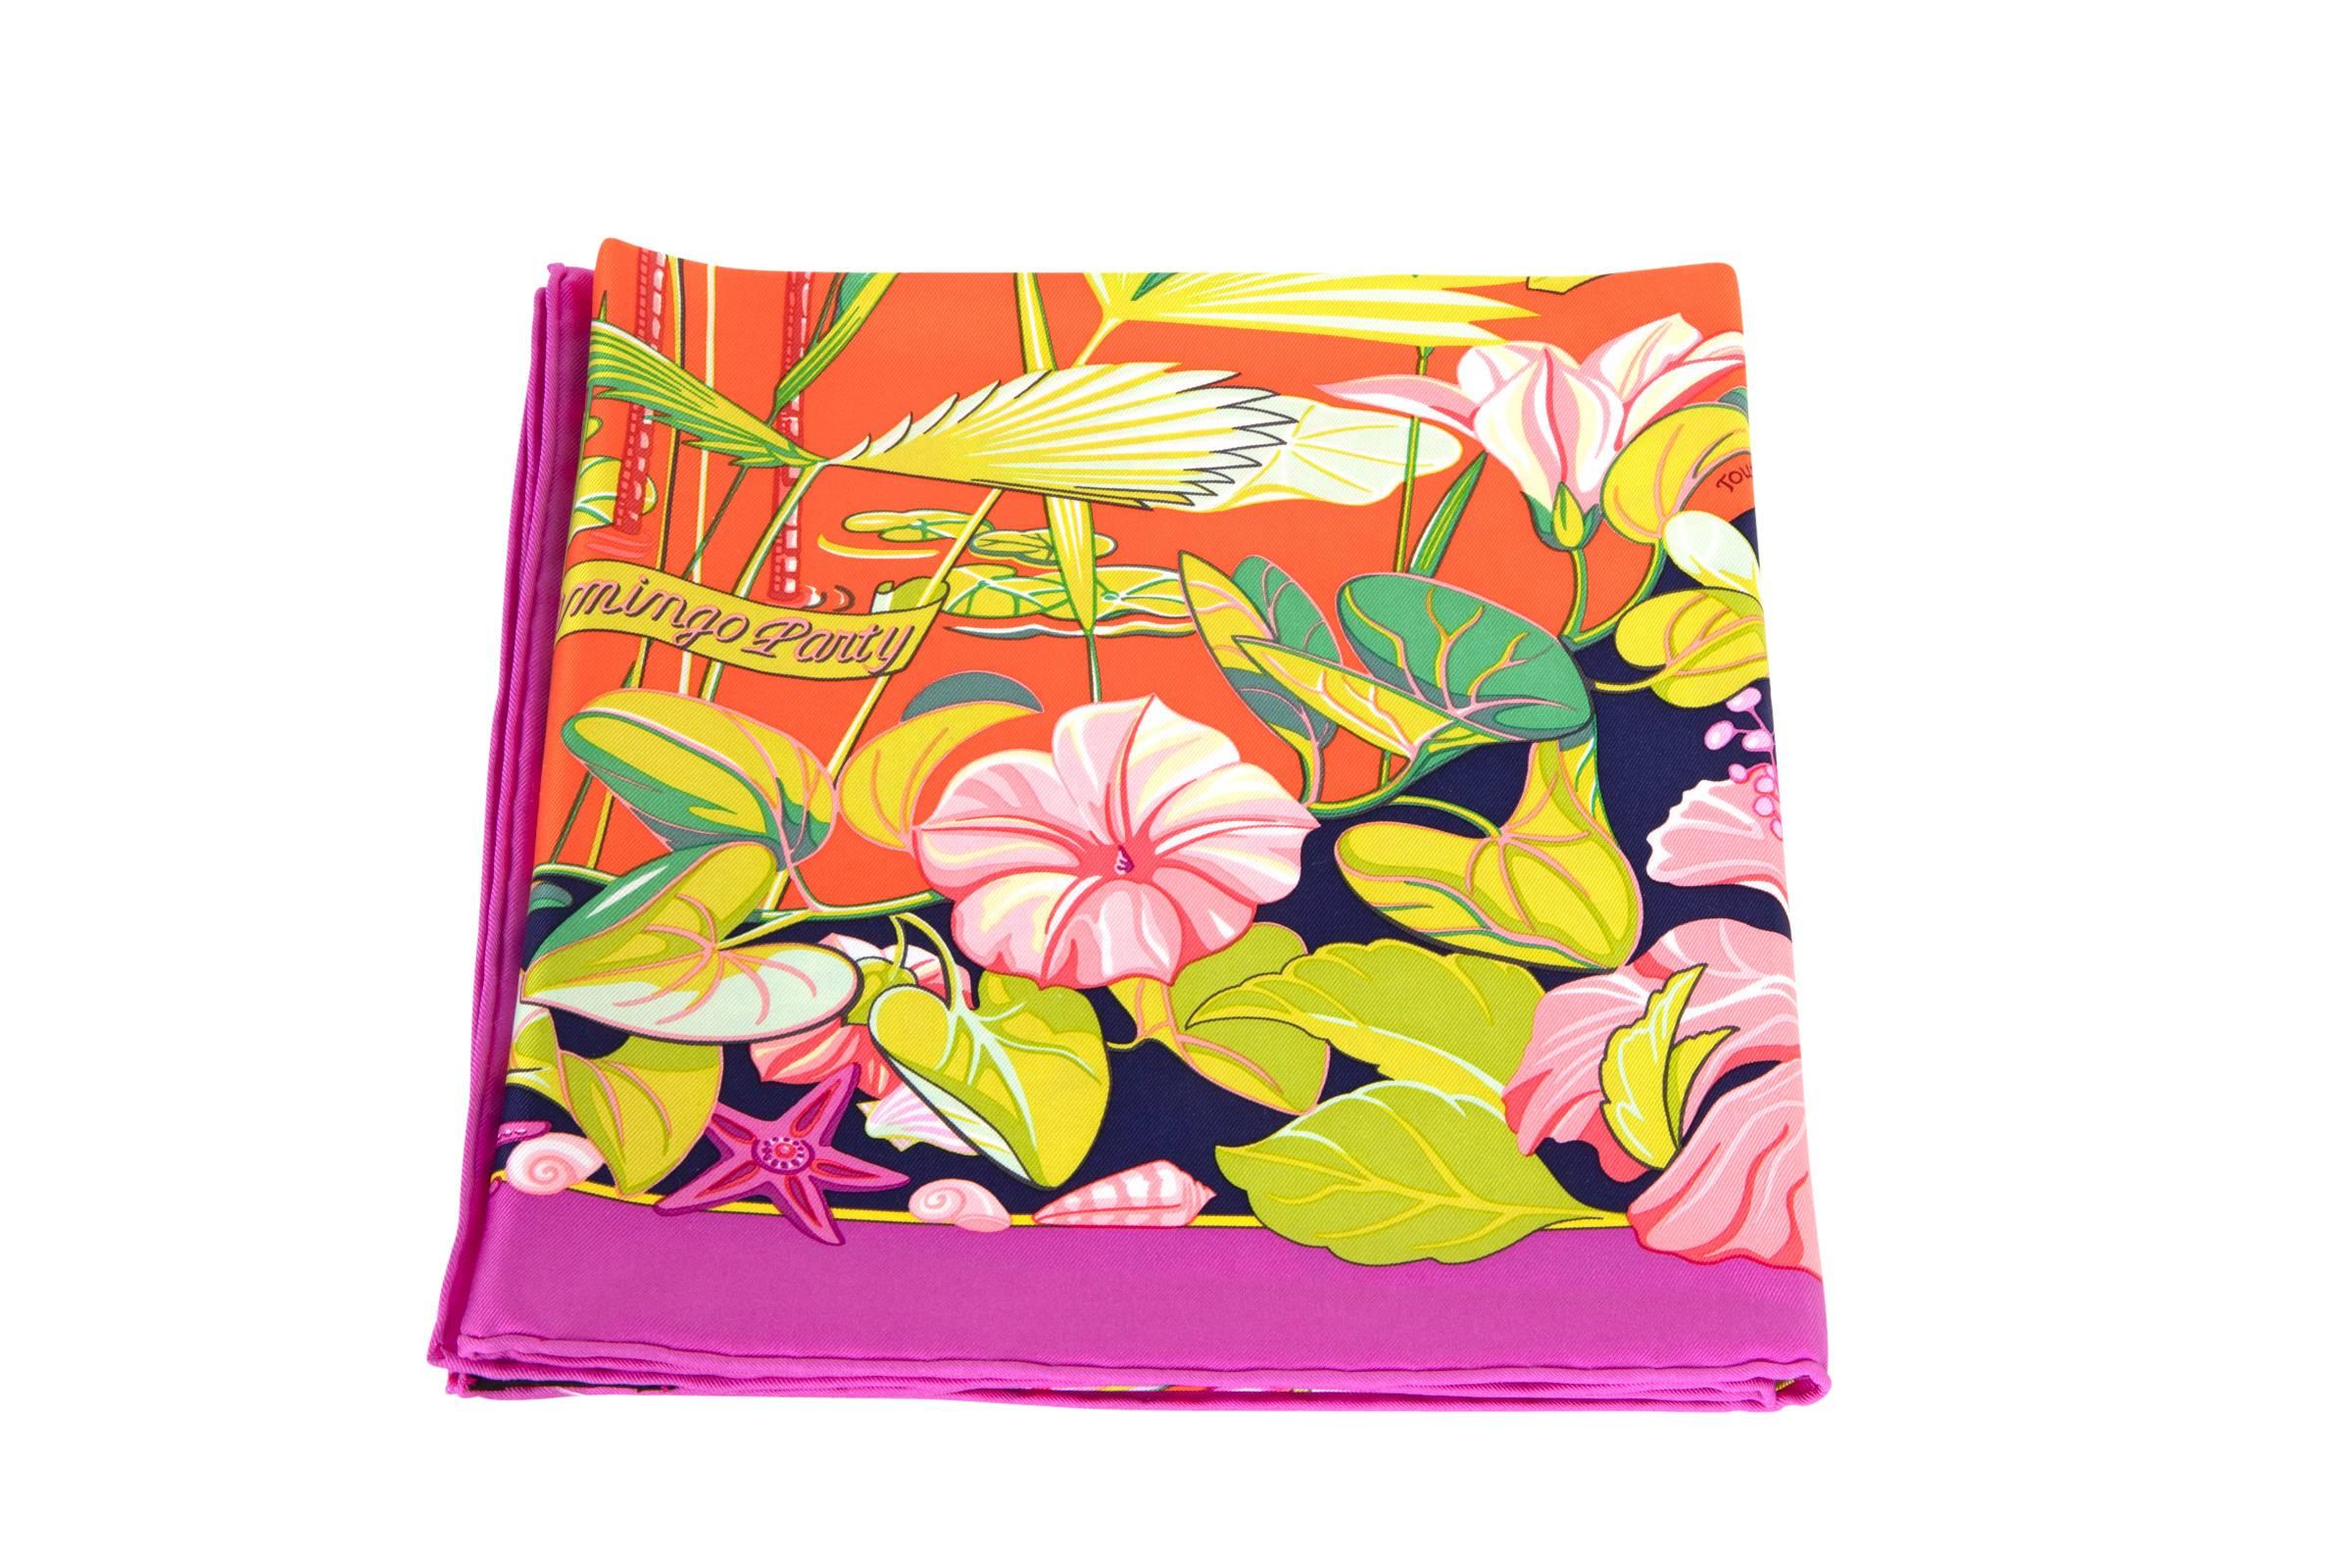 Hermes Scarf Flamingo Party Miami 90 cm Silk Limited Edition Pink Carre New w/ B 5